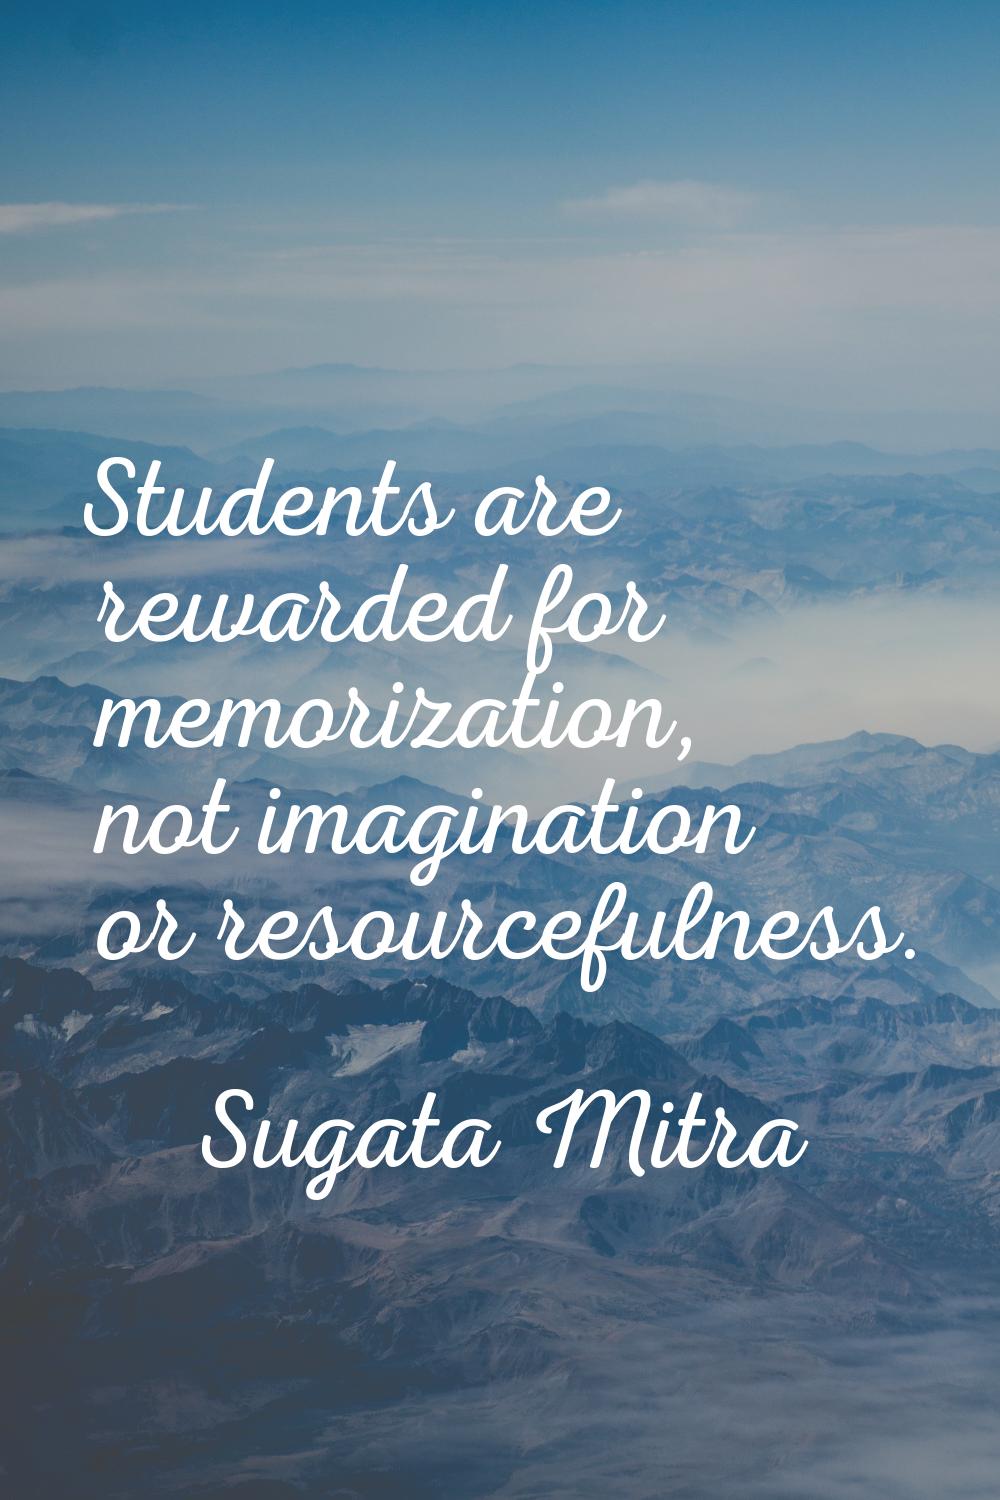 Students are rewarded for memorization, not imagination or resourcefulness.